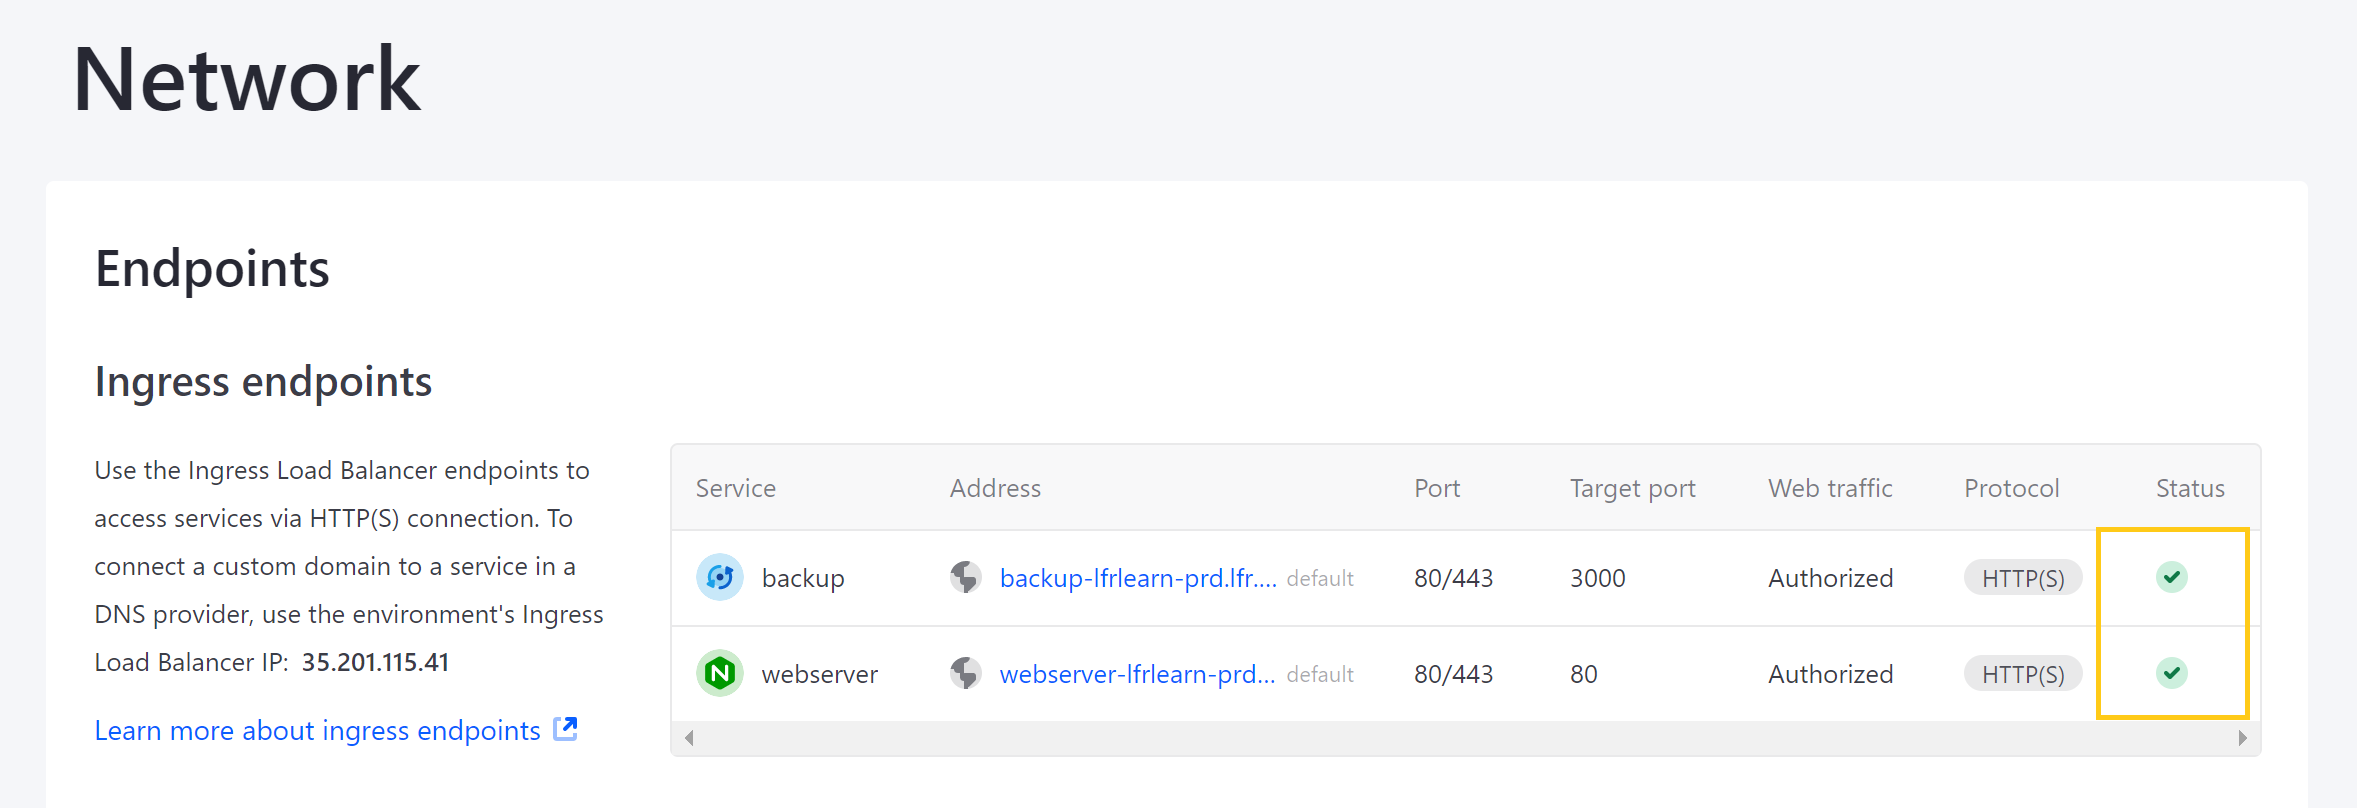 Figure 4: View all your endpoints and custom domains on the Network page.